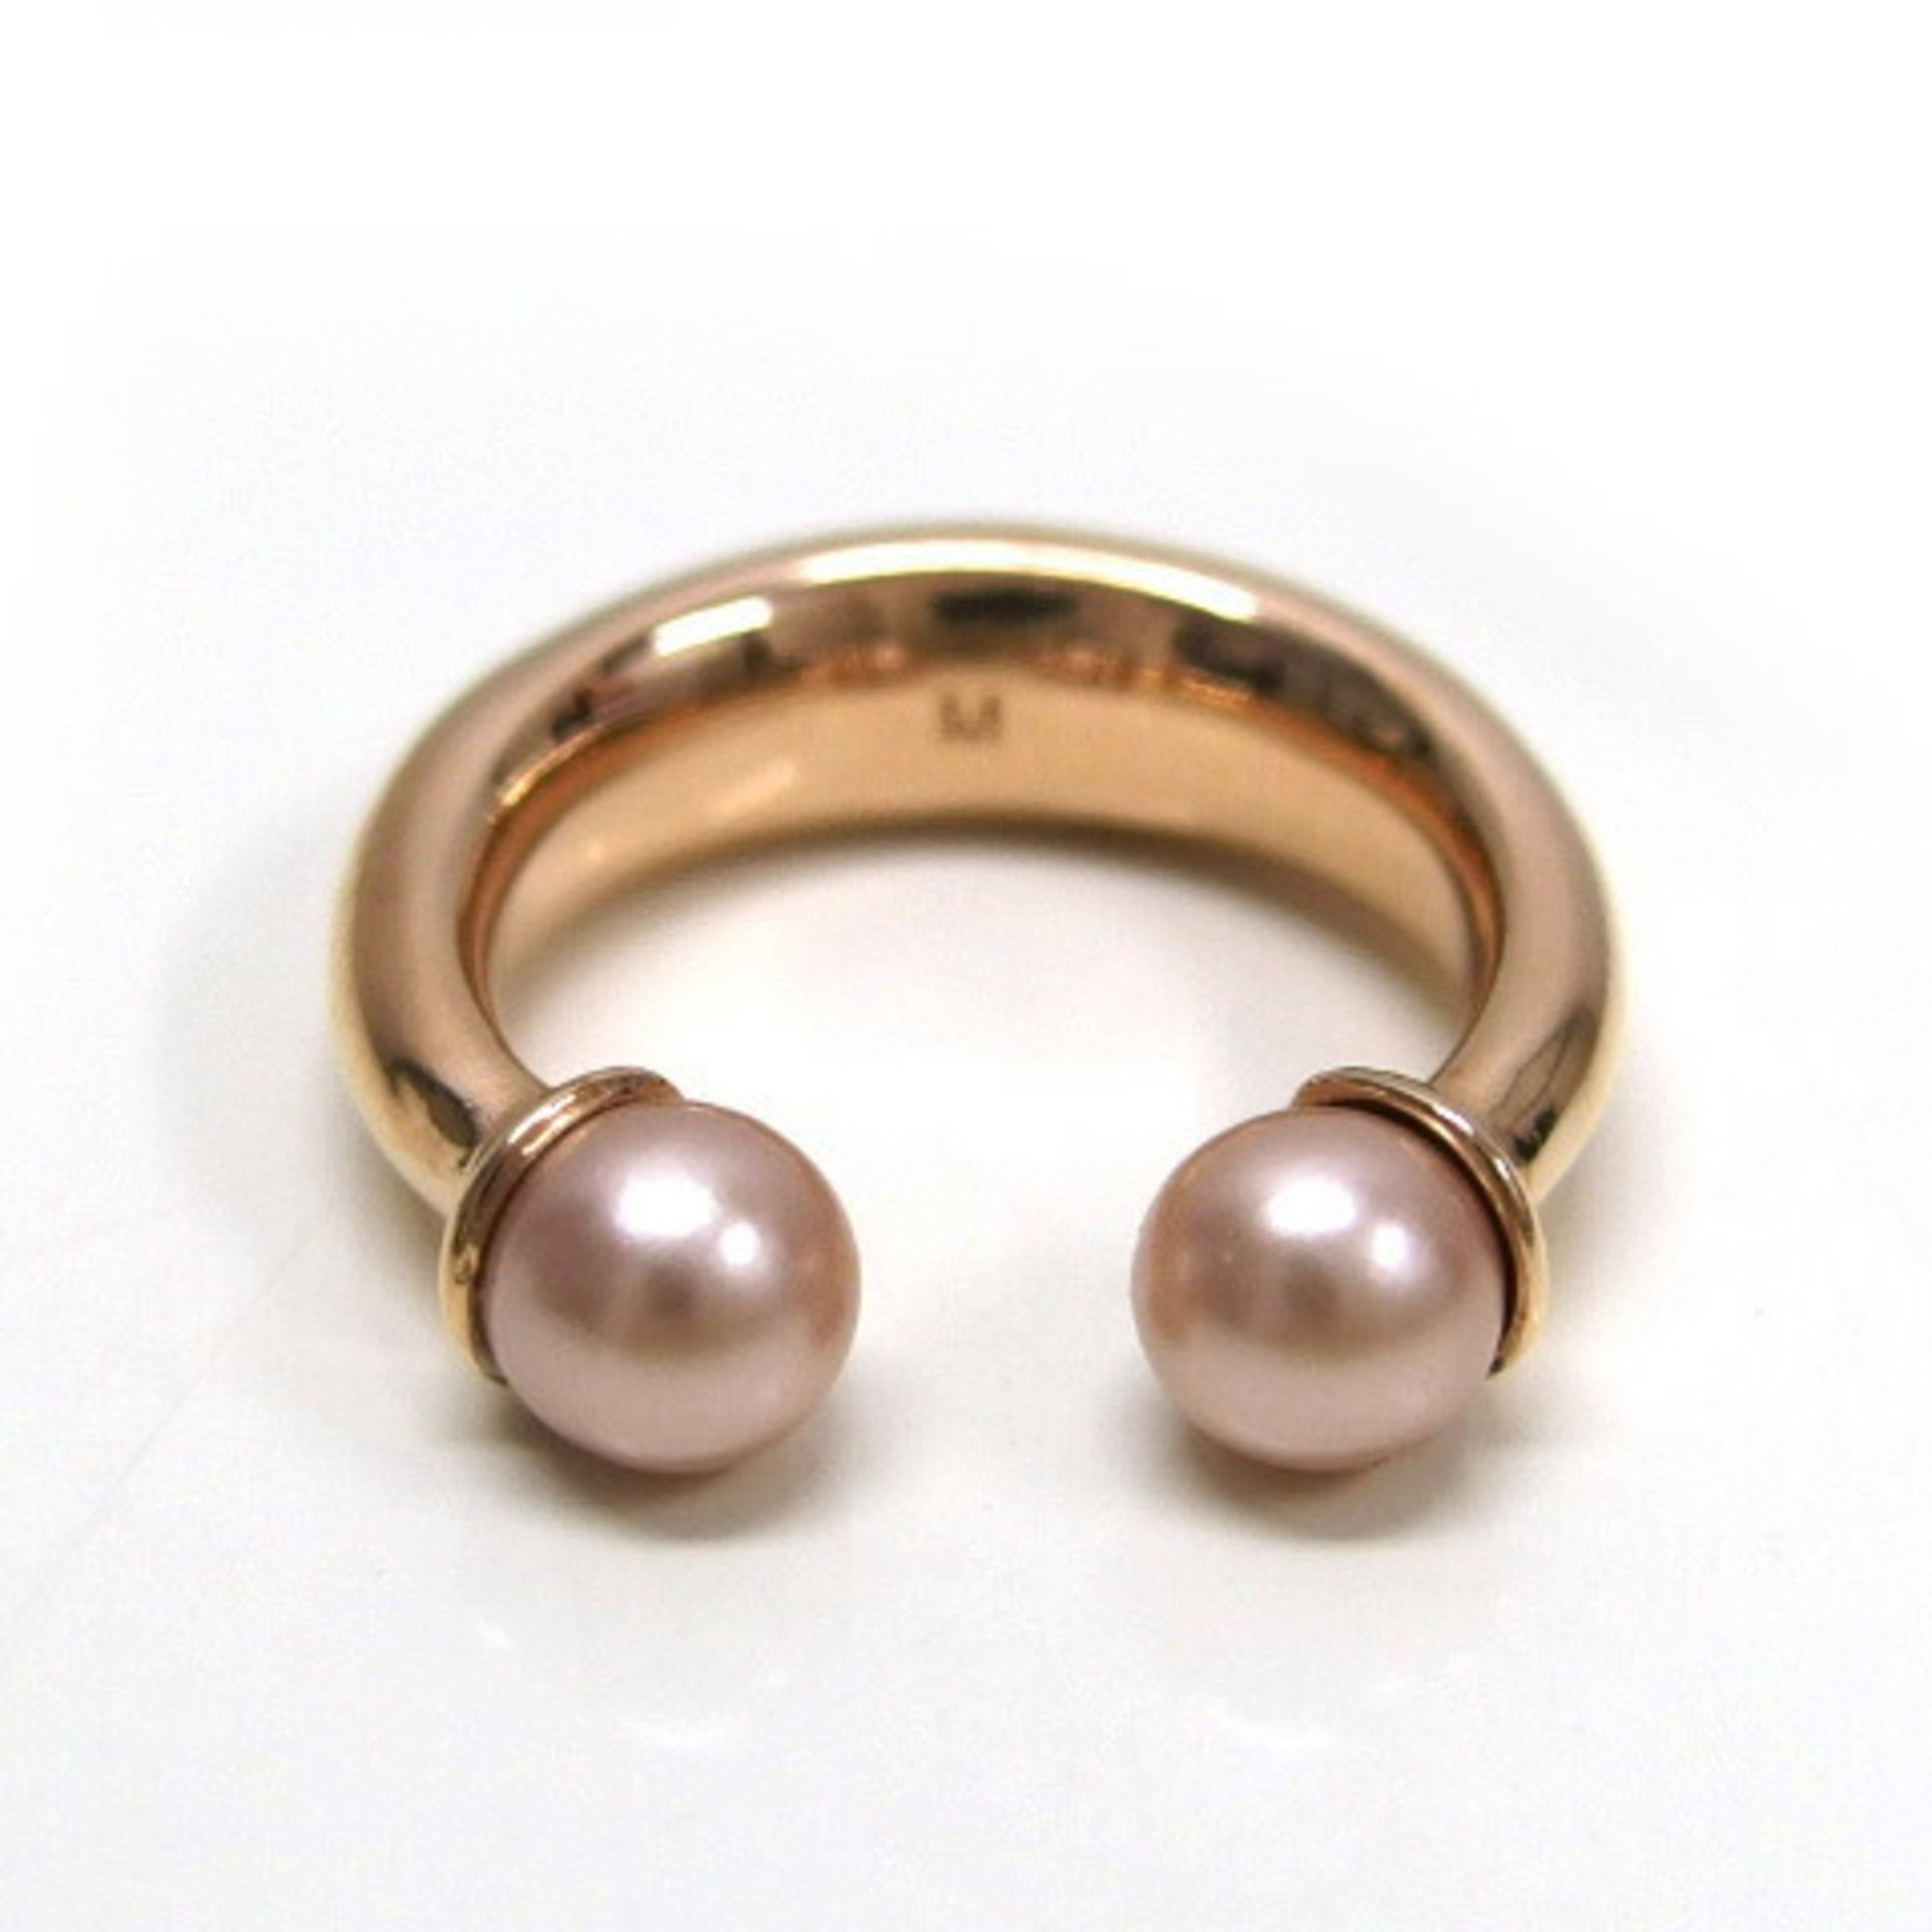 Christian Dior tribal ring, fake pearl, size 12